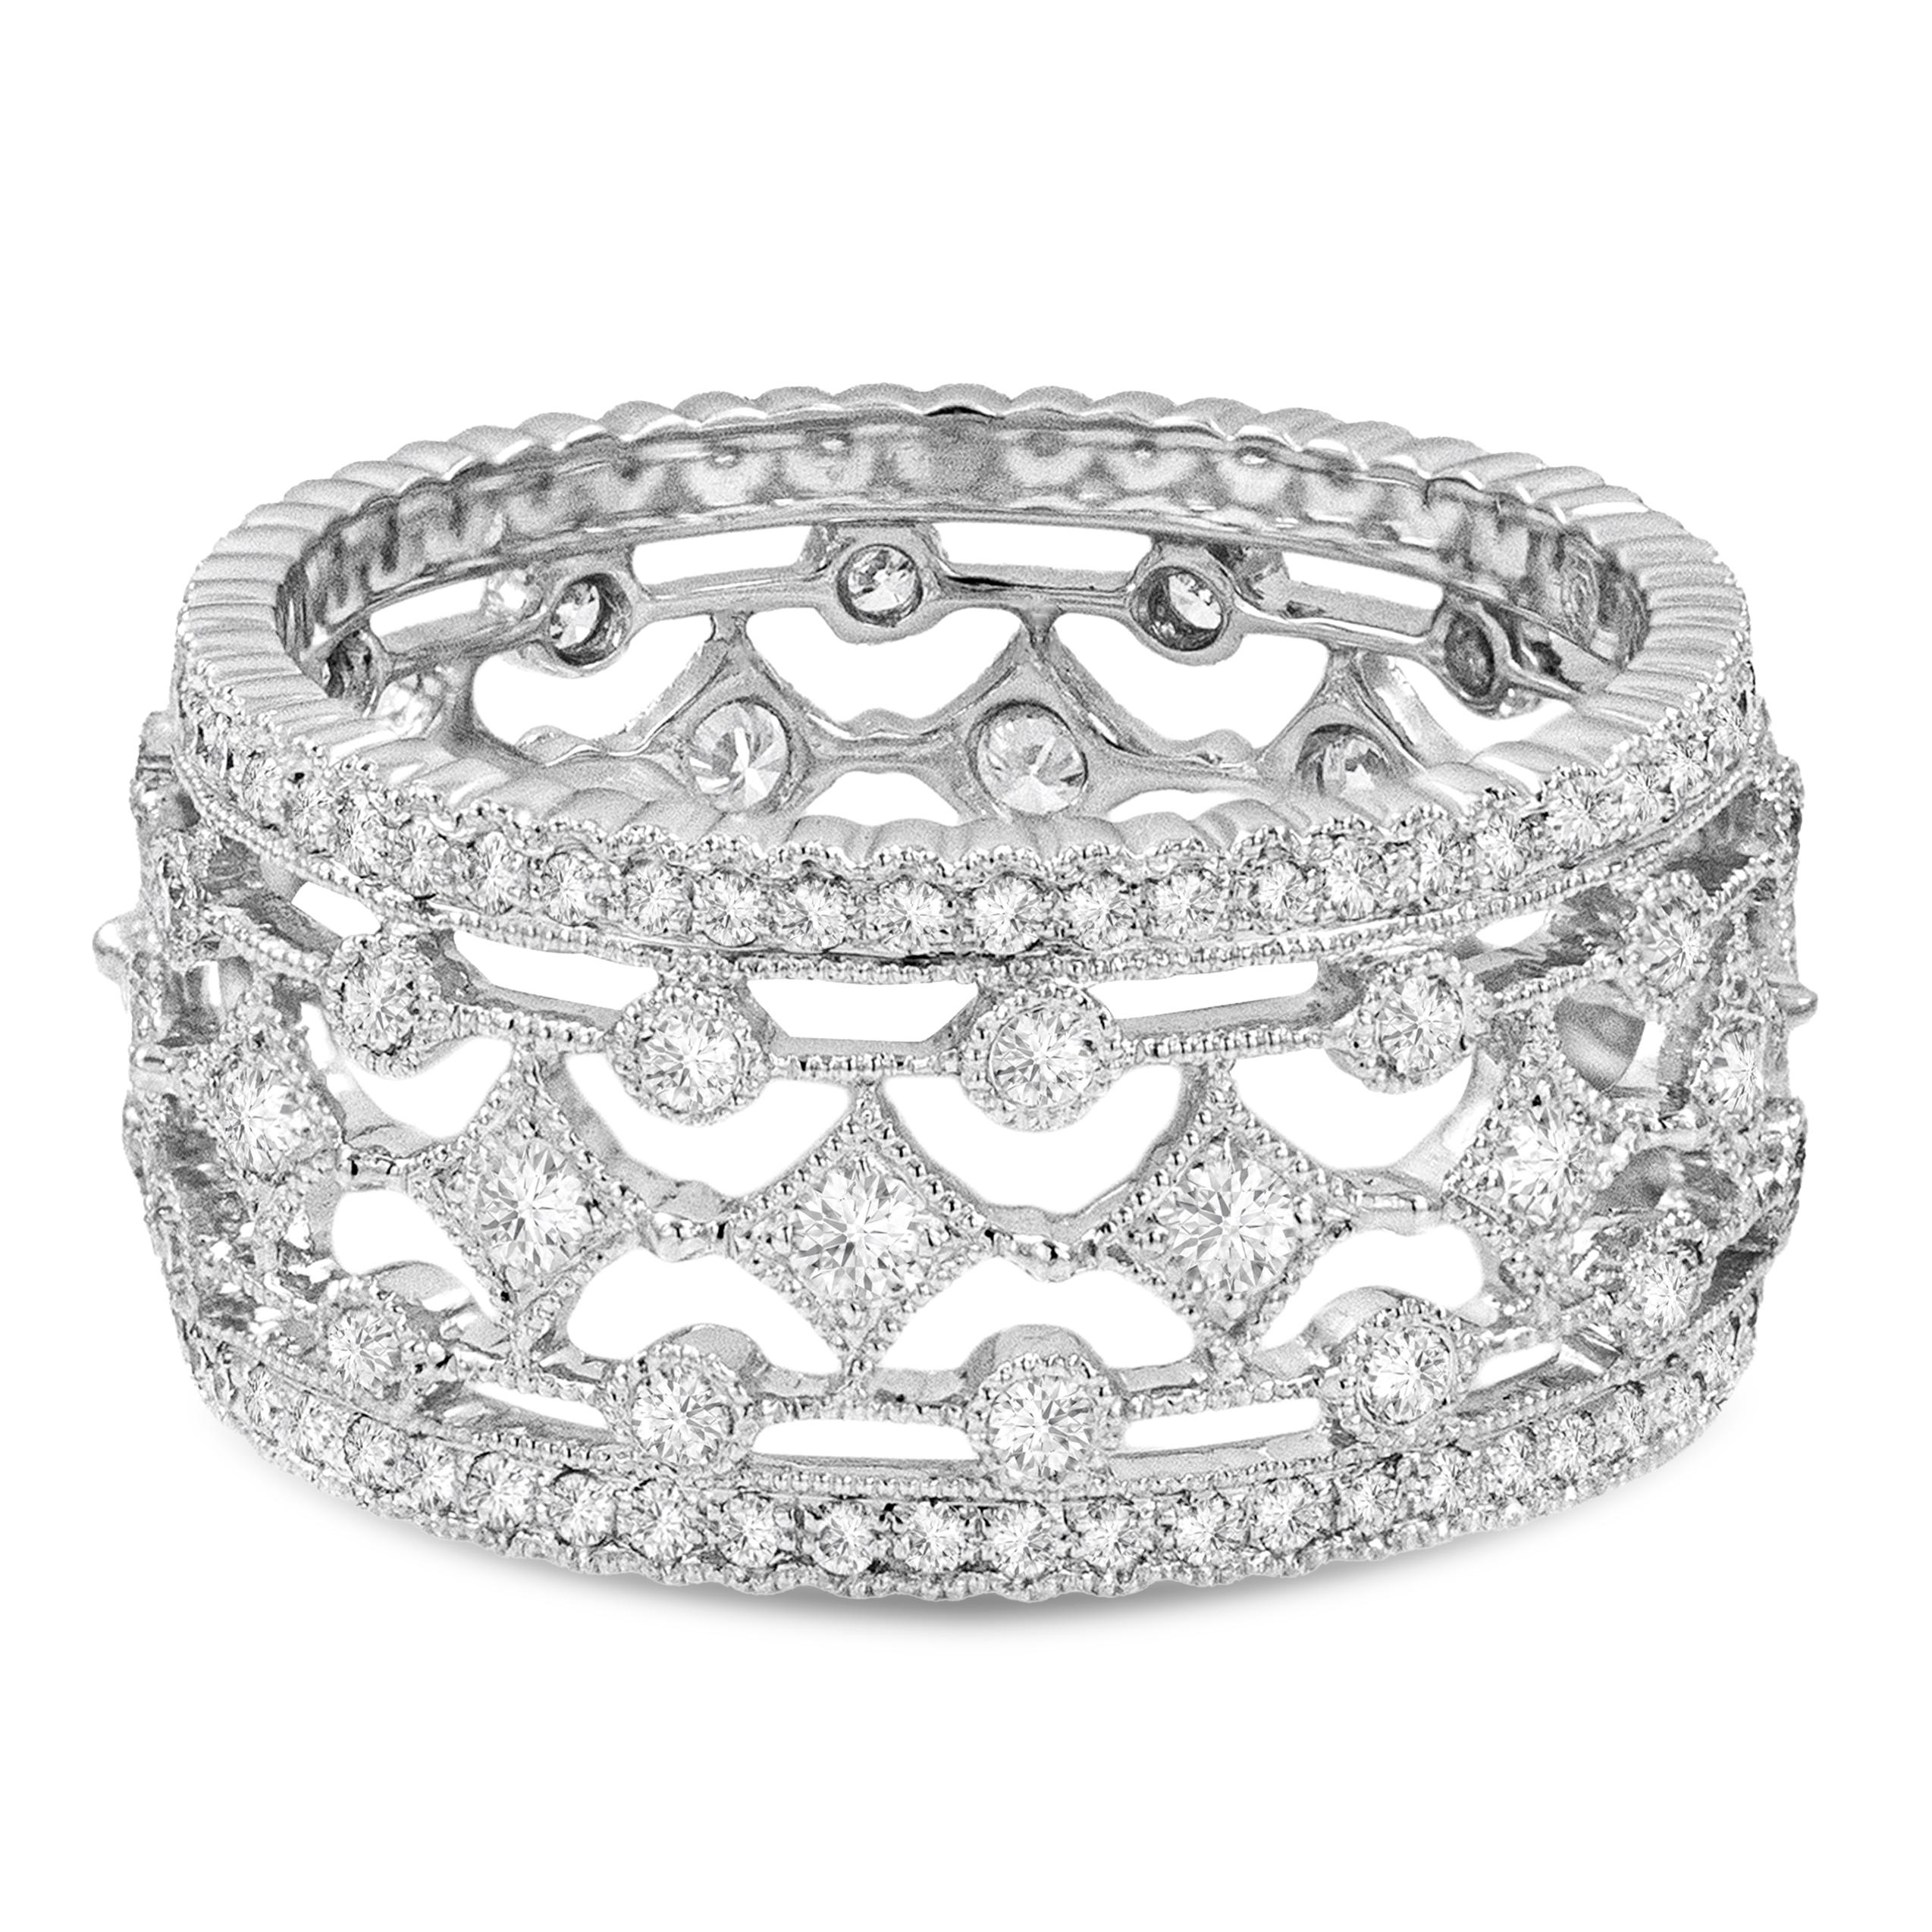 Roman Malakov 1.04 Carats Total Brilliant Round Diamond Wide Wedding Band Ring For Sale